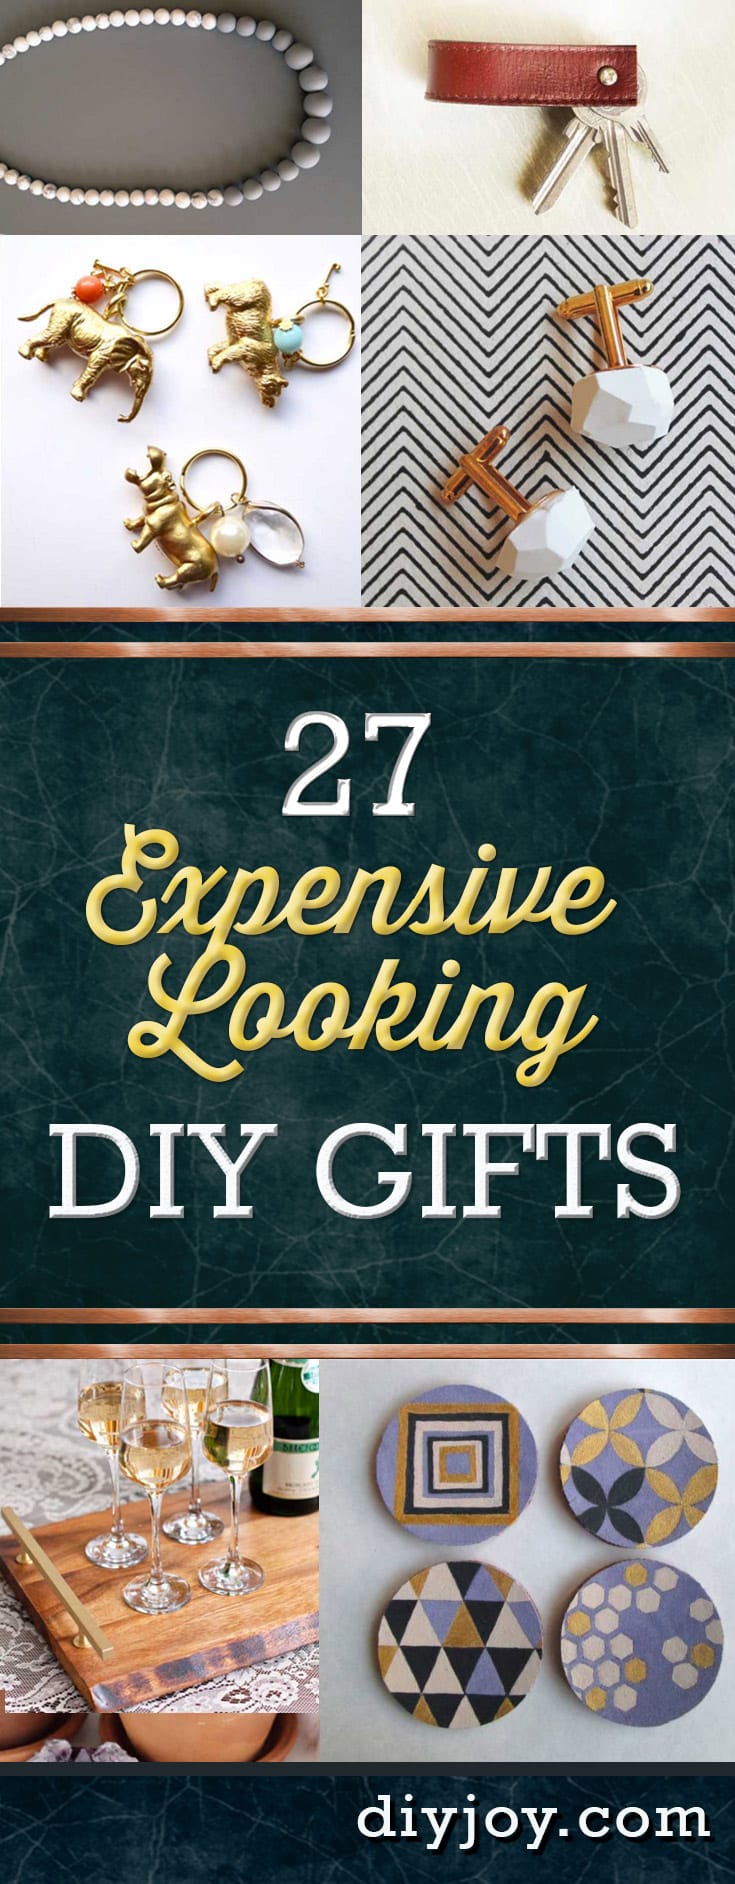 Cheap DIY Gifts - Pinterest Ideas for DYI Presents - Expensive Looking Gift Ideas to Make for Chrsitmas, Birthday, Anniversary